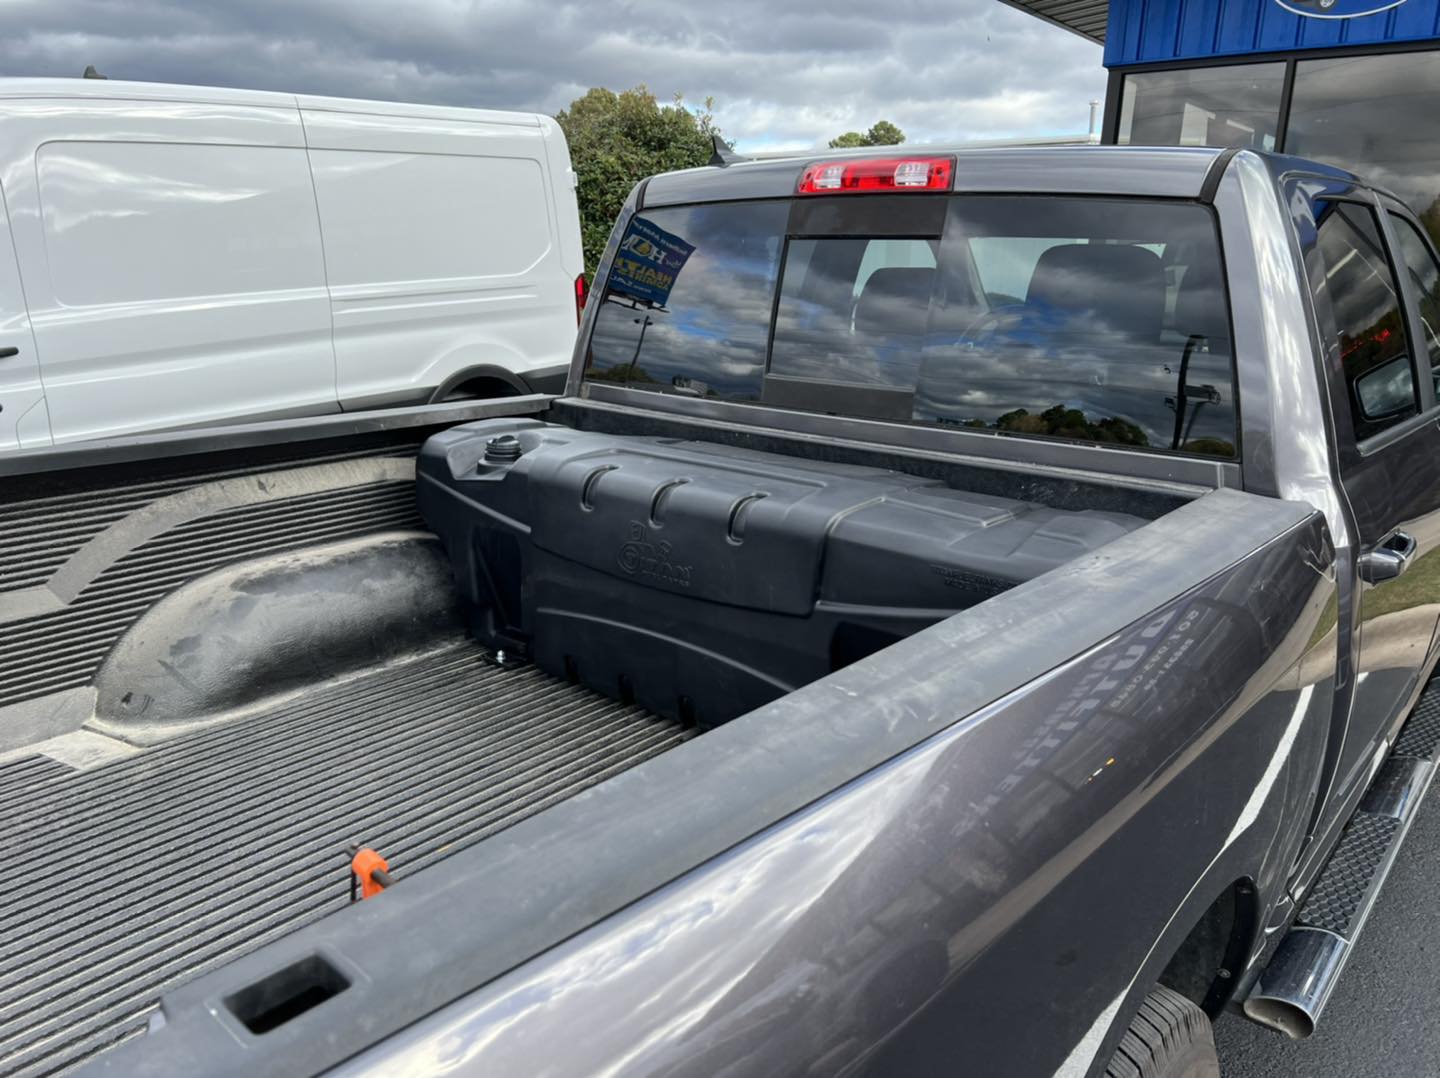 work truck with new gas tank installed in bed